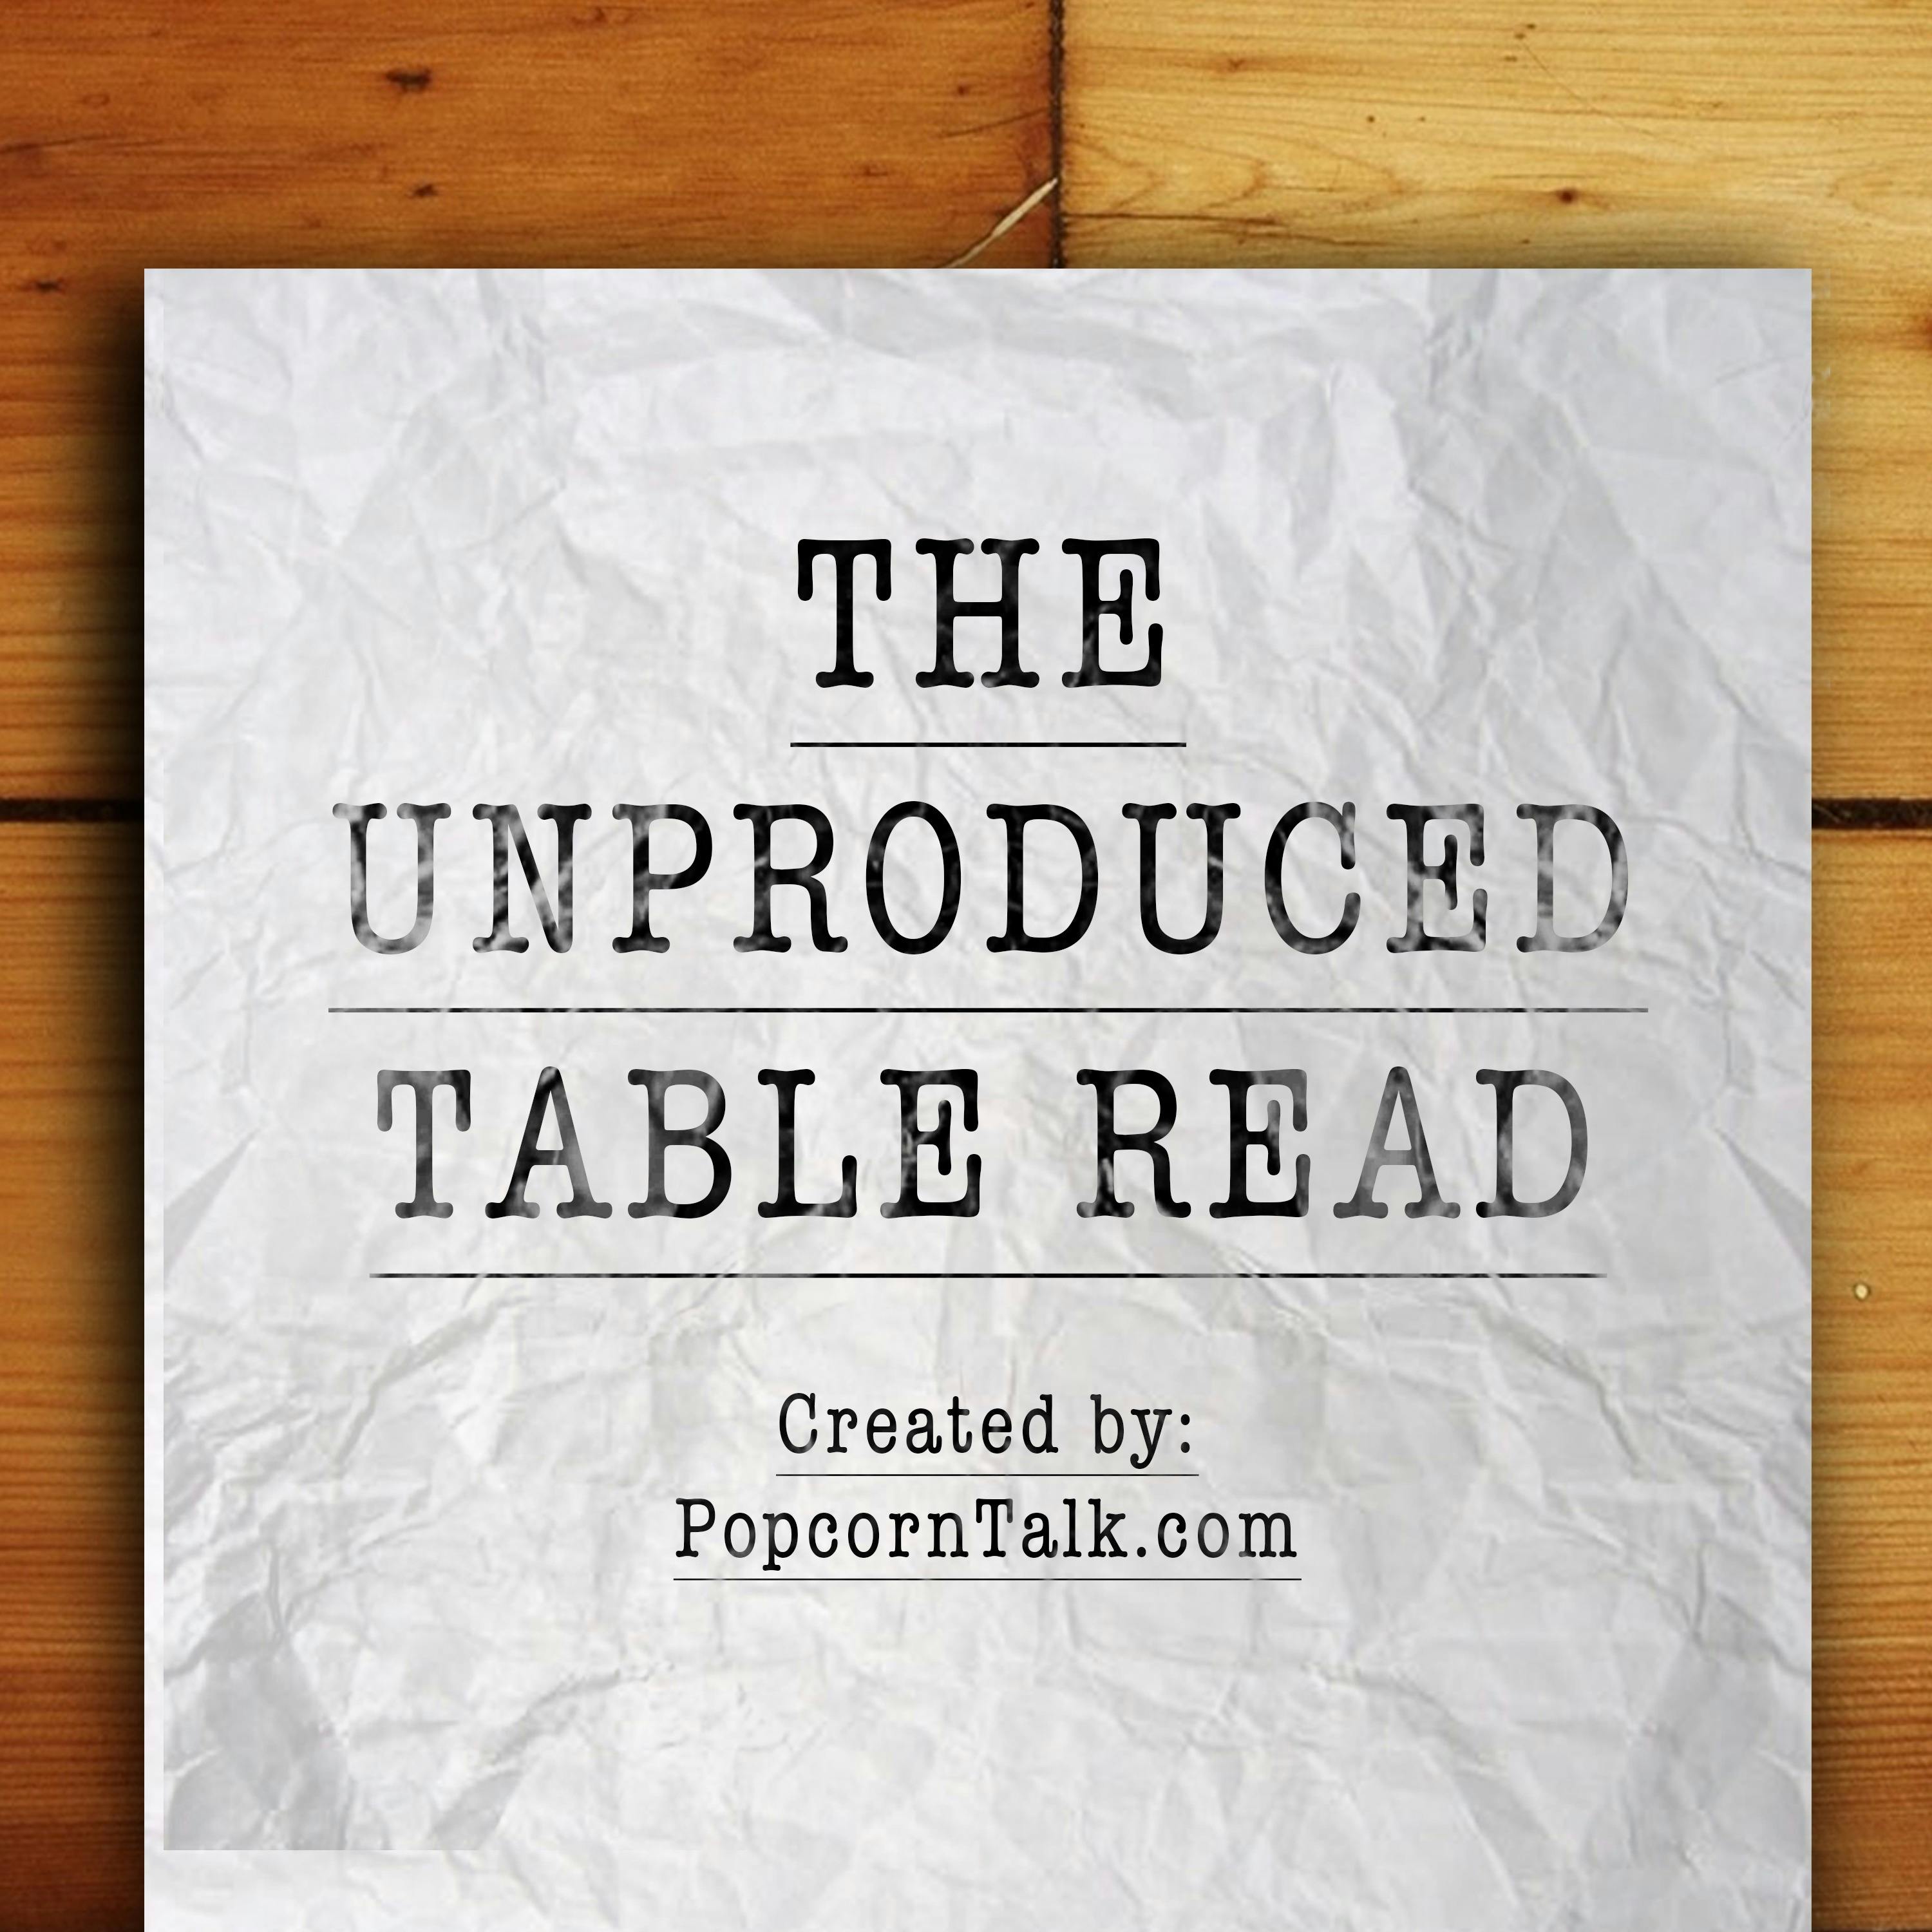 THE END OF THE STARS Table Read w/ Chris Parizo – The Unproduced Table Read #9